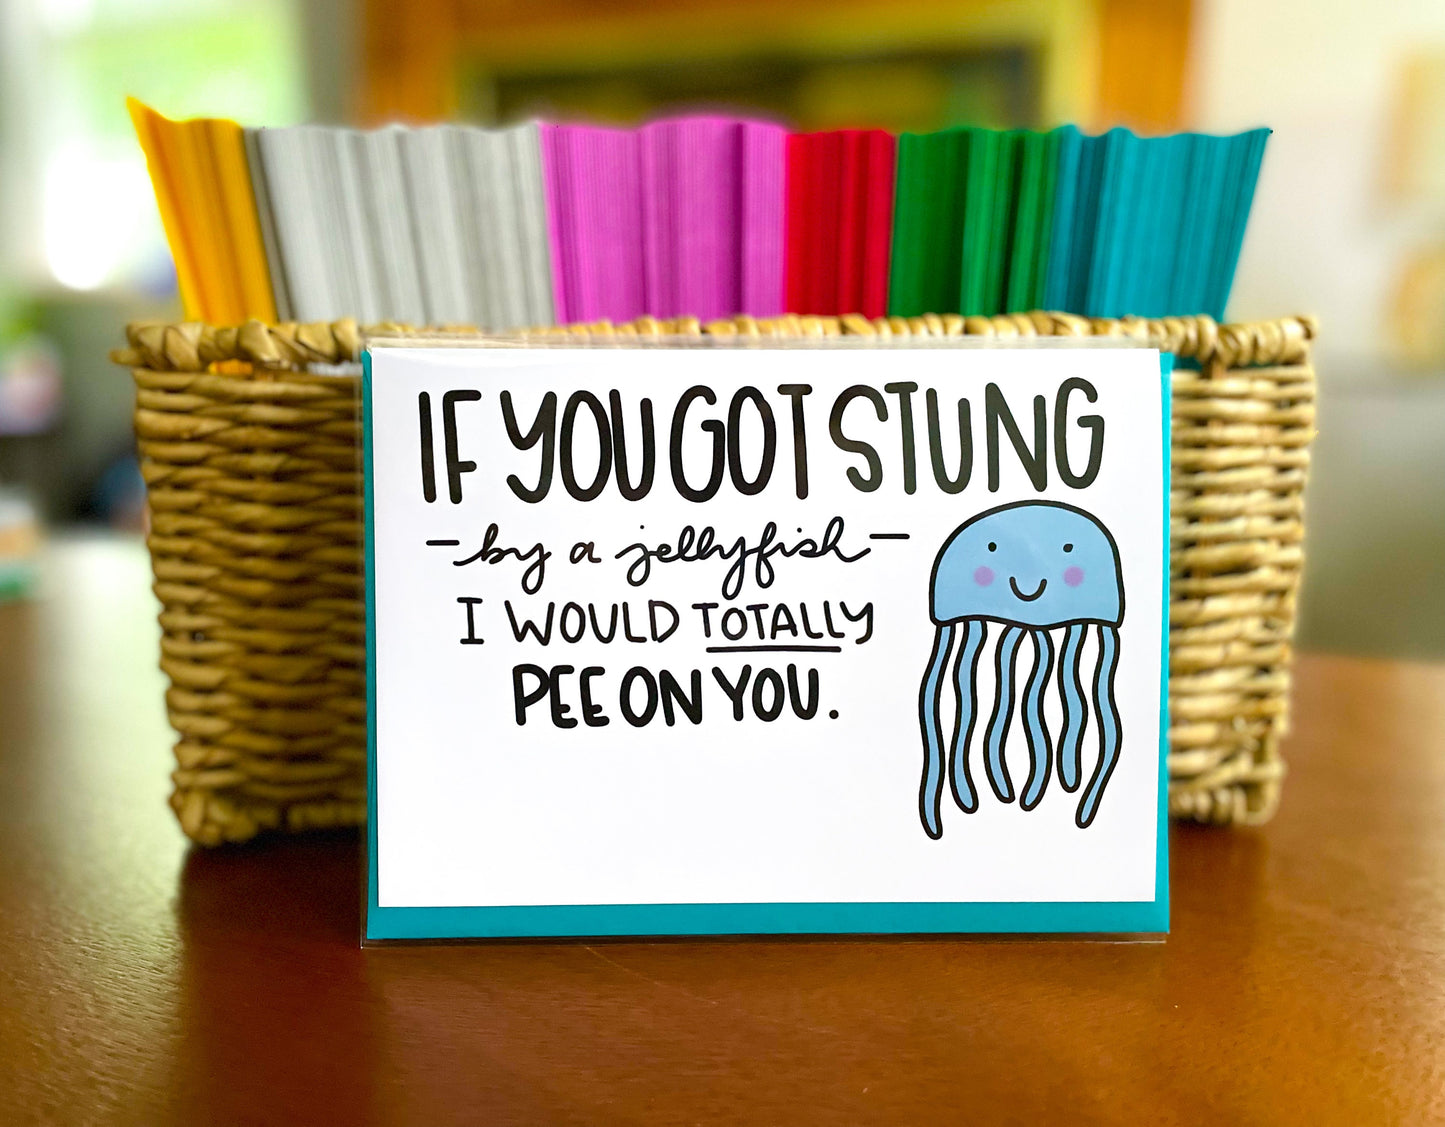 If You Got Stung by a Jellyfish I Would Pee On You by StoneDonut Design